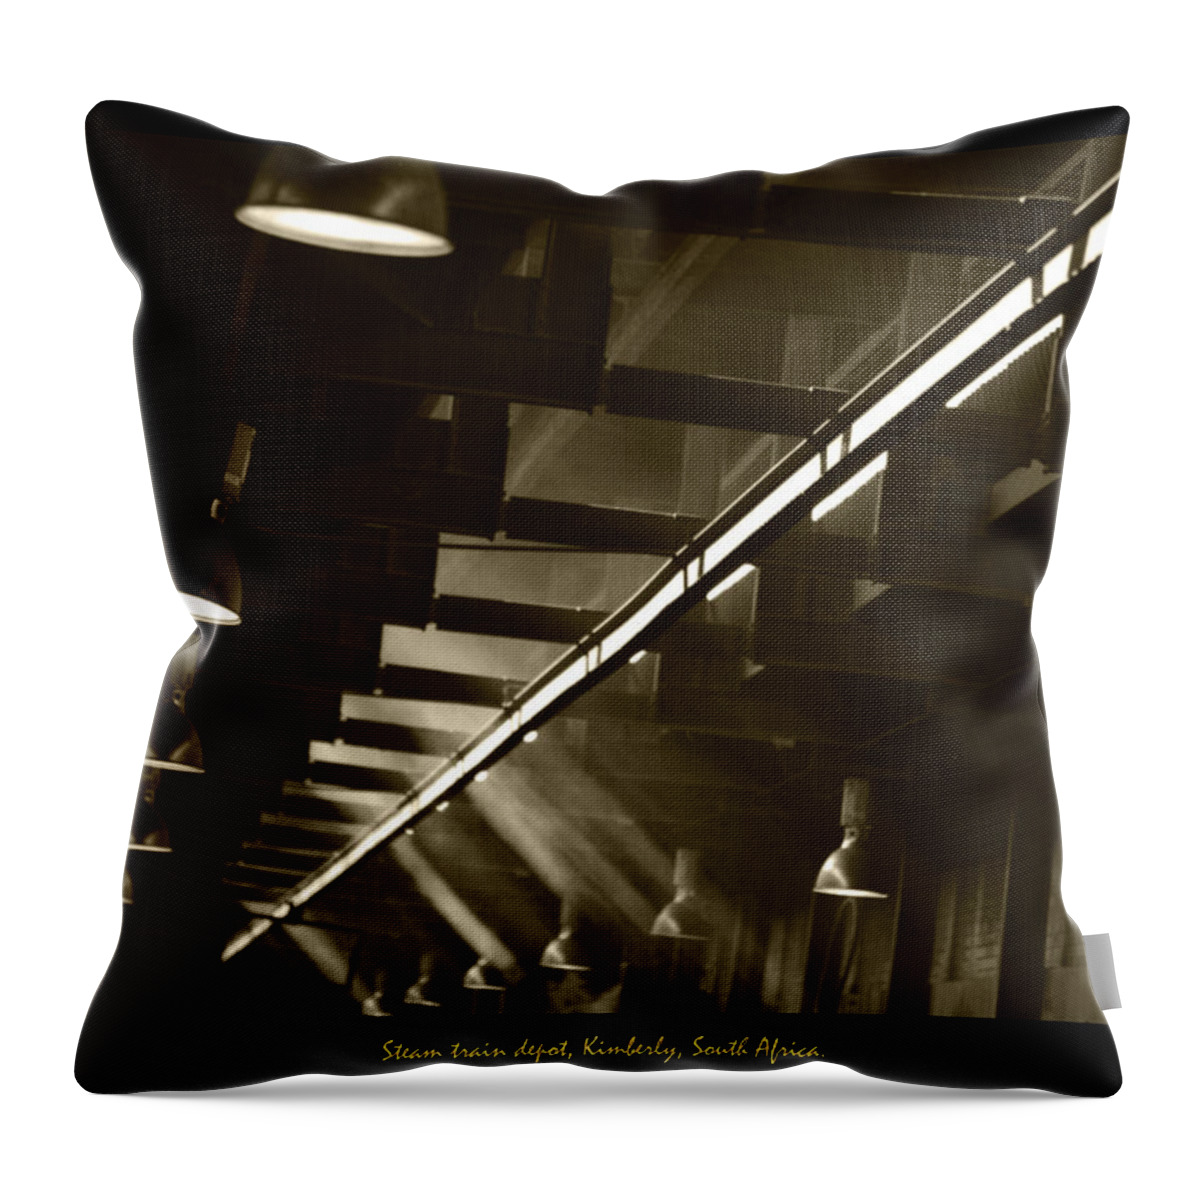 Steam Throw Pillow featuring the photograph Steam Train Shed Kimberly South Africa by Vincent Franco